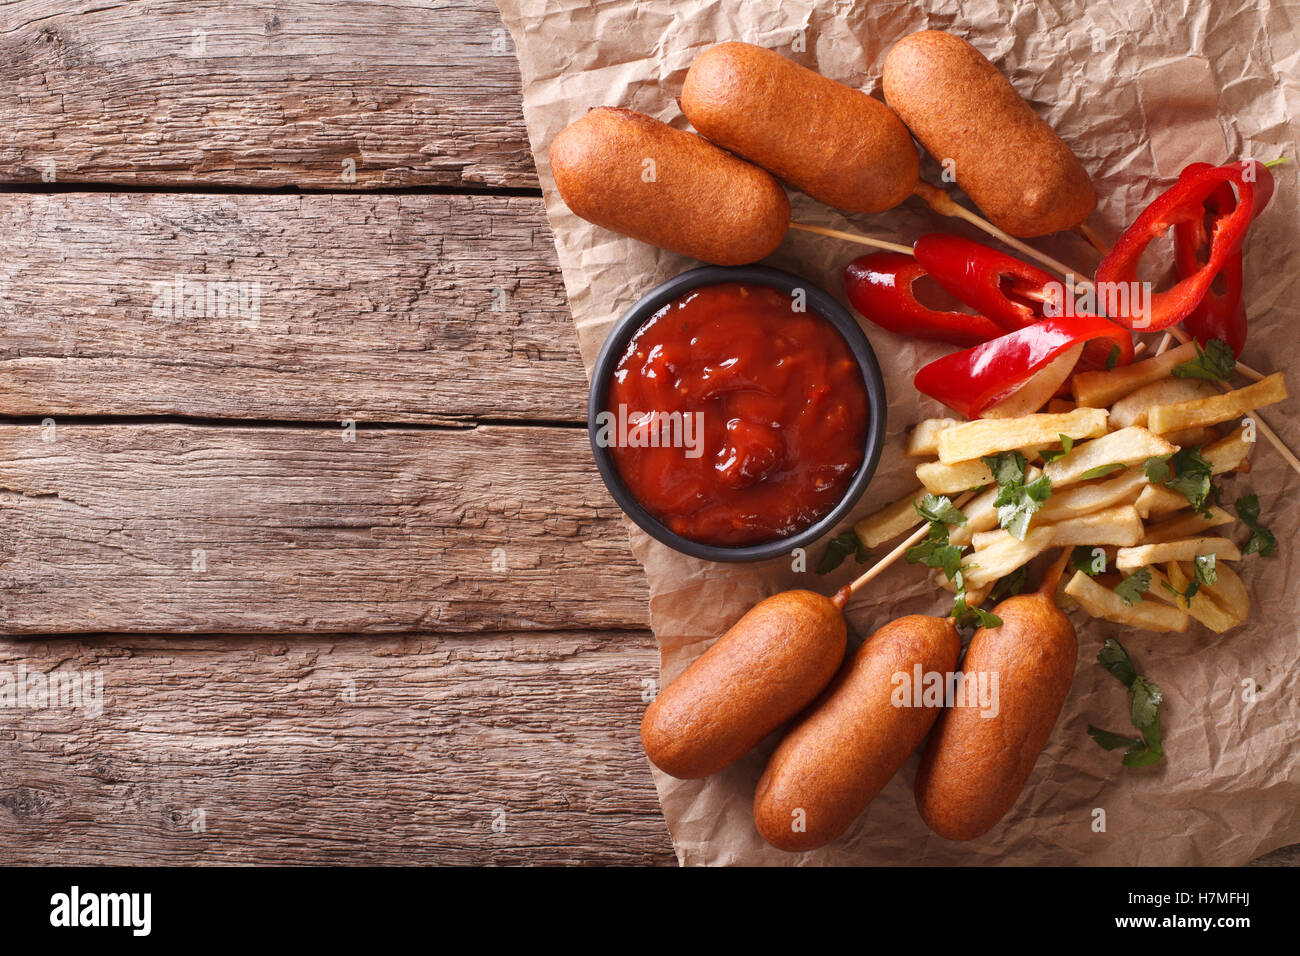 Fast Food: Corn dogs, french fries and ketchup on the table. horizontal view from above Stock Photo